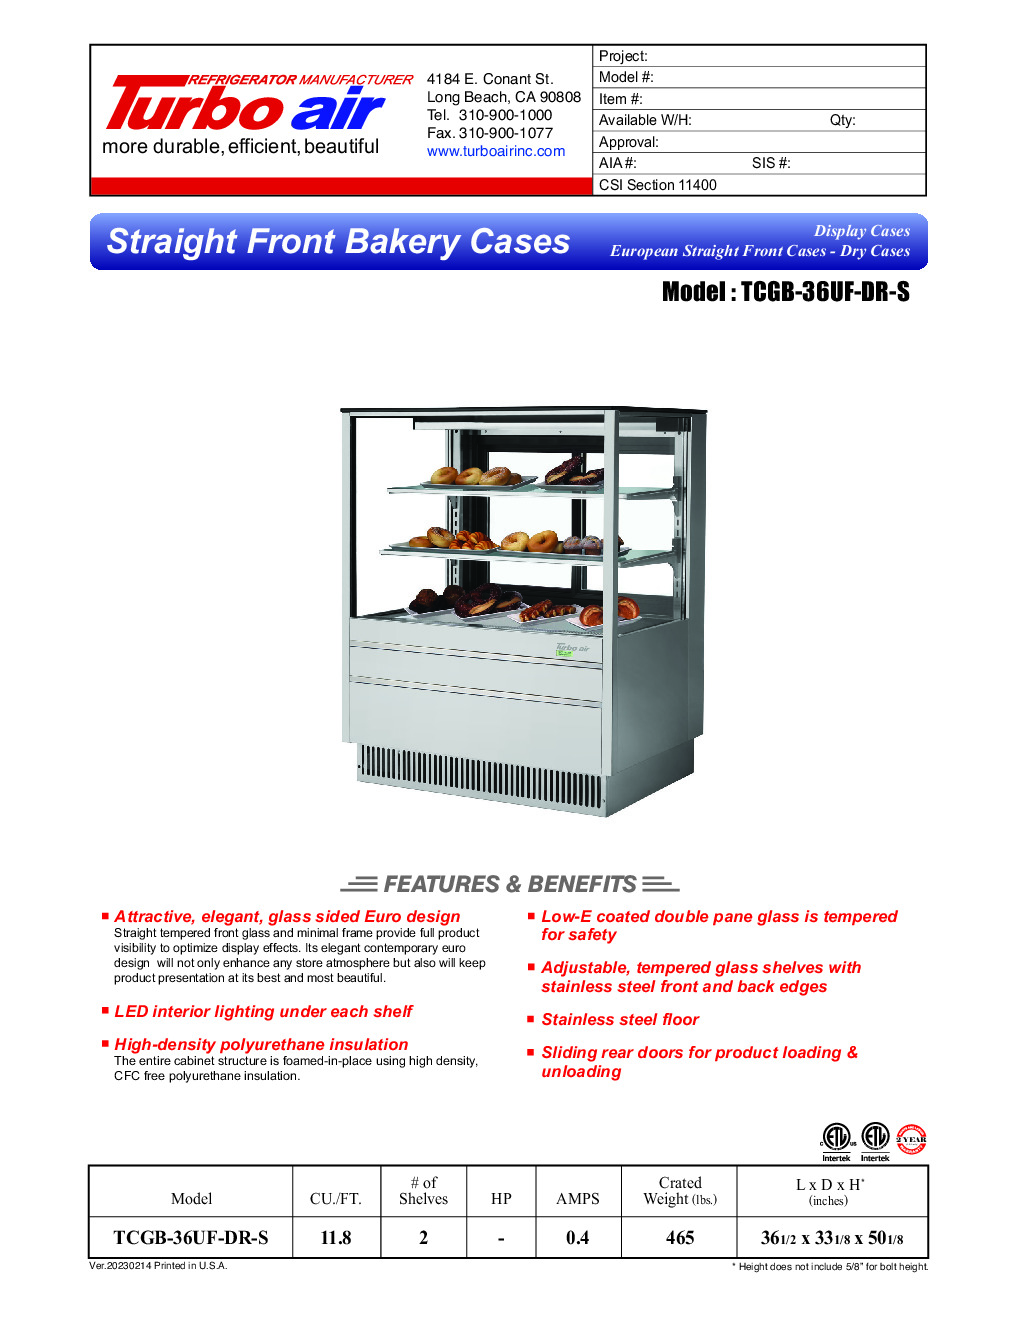 Turbo Air TCGB-36UF-DR-S Non-Refrigerated Bakery Display Case